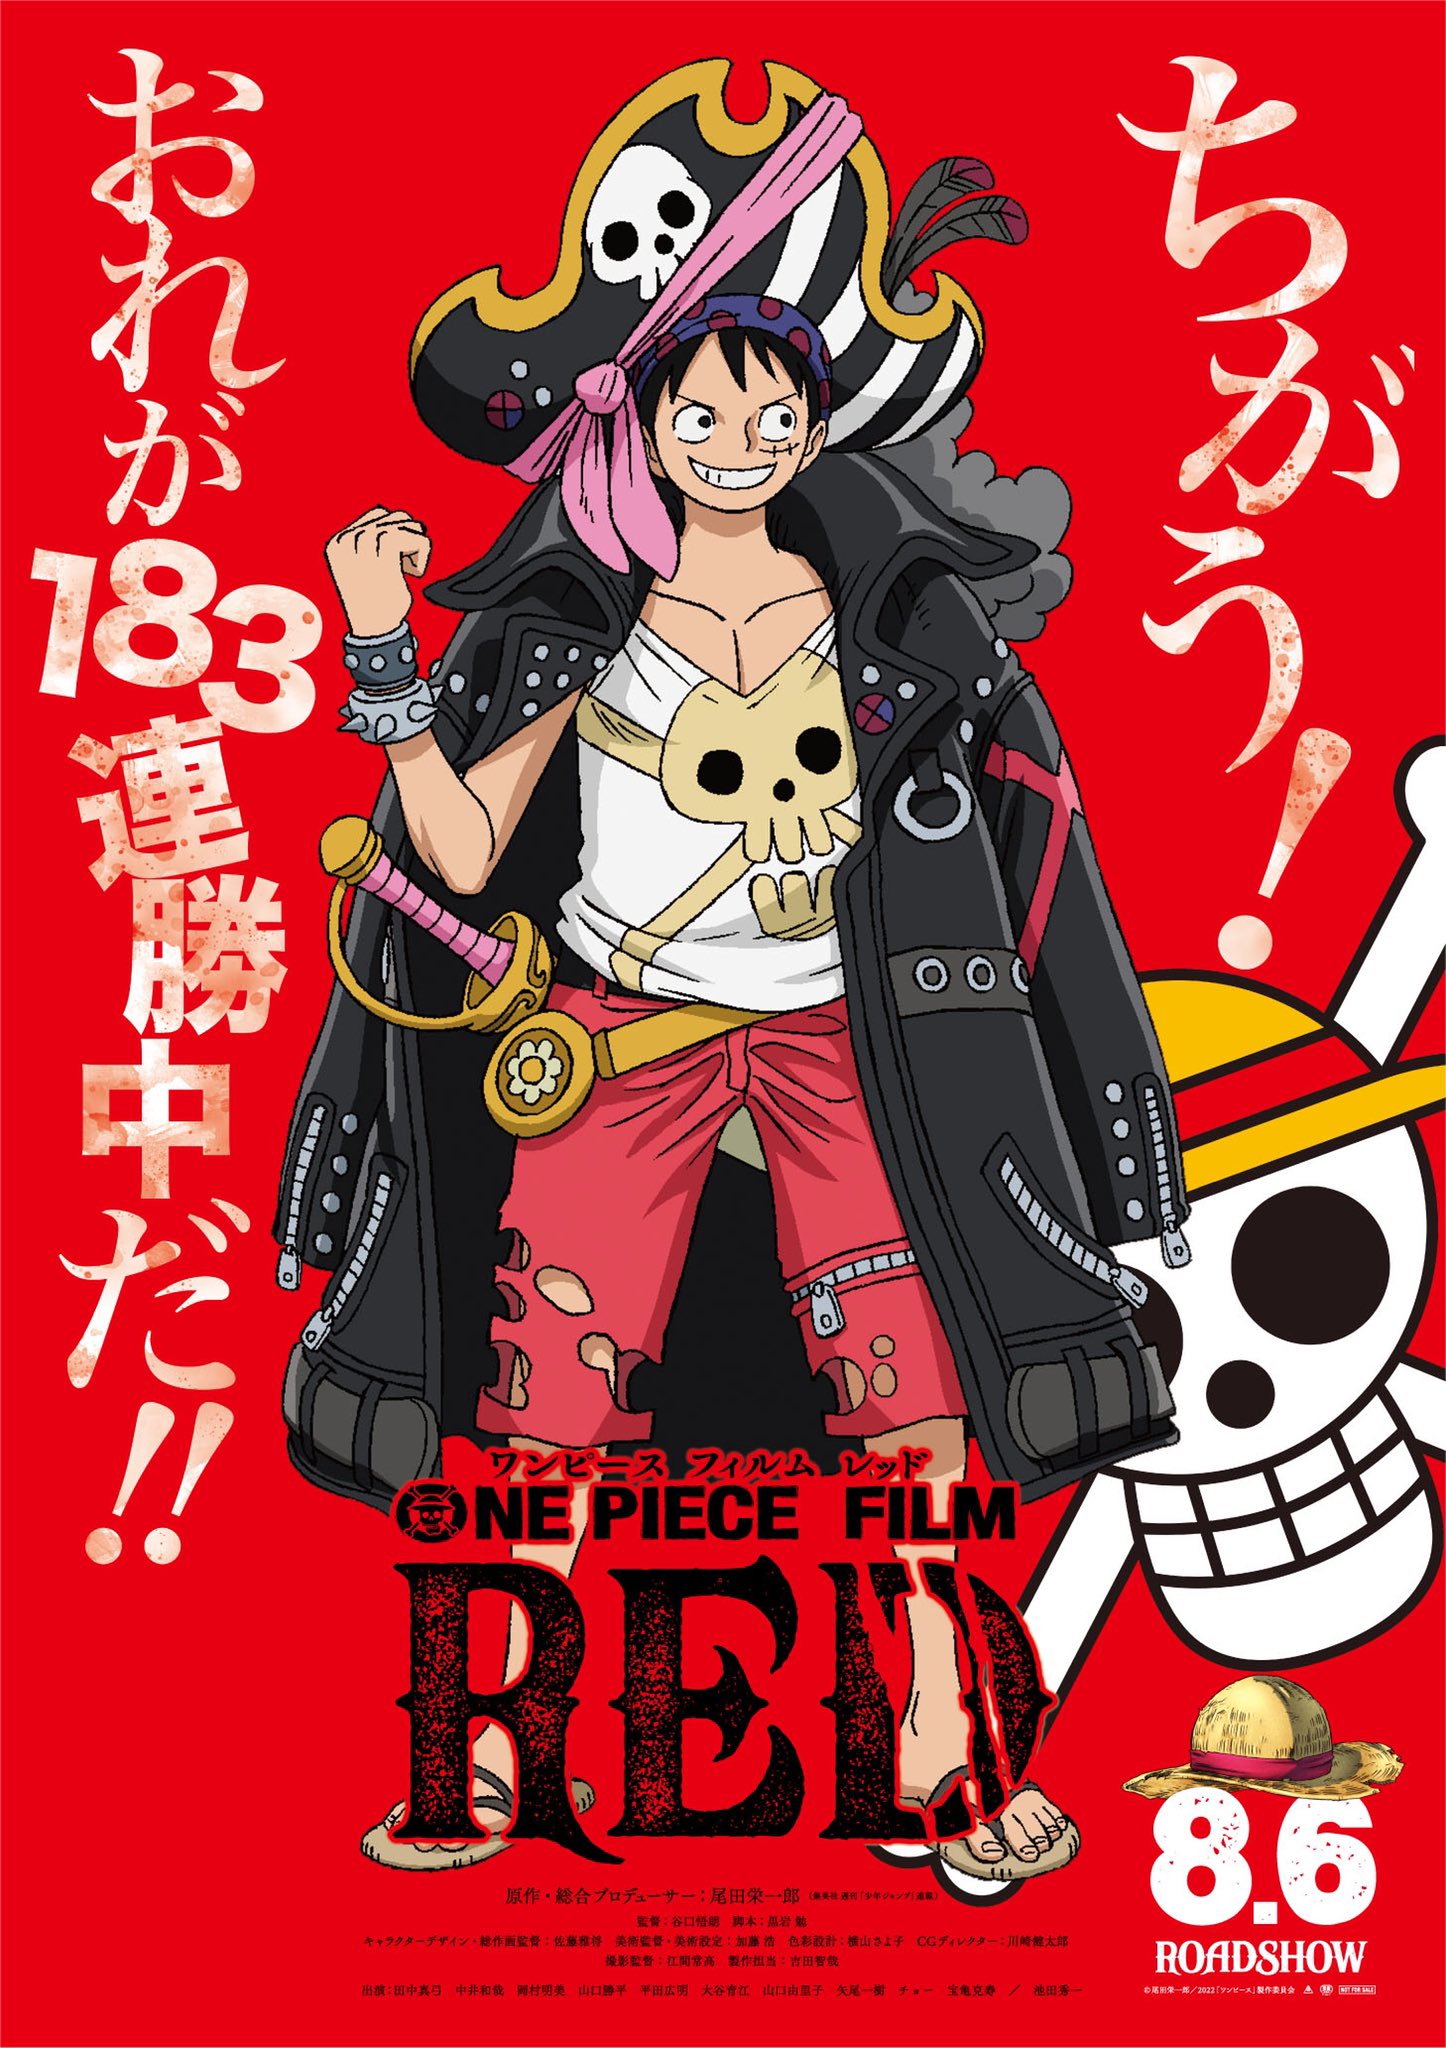 One Piece Special Edition (HD, Subtitled): East Blue (1-61) An Angry  Showdown! Cross the Red Line! - Watch on Crunchyroll